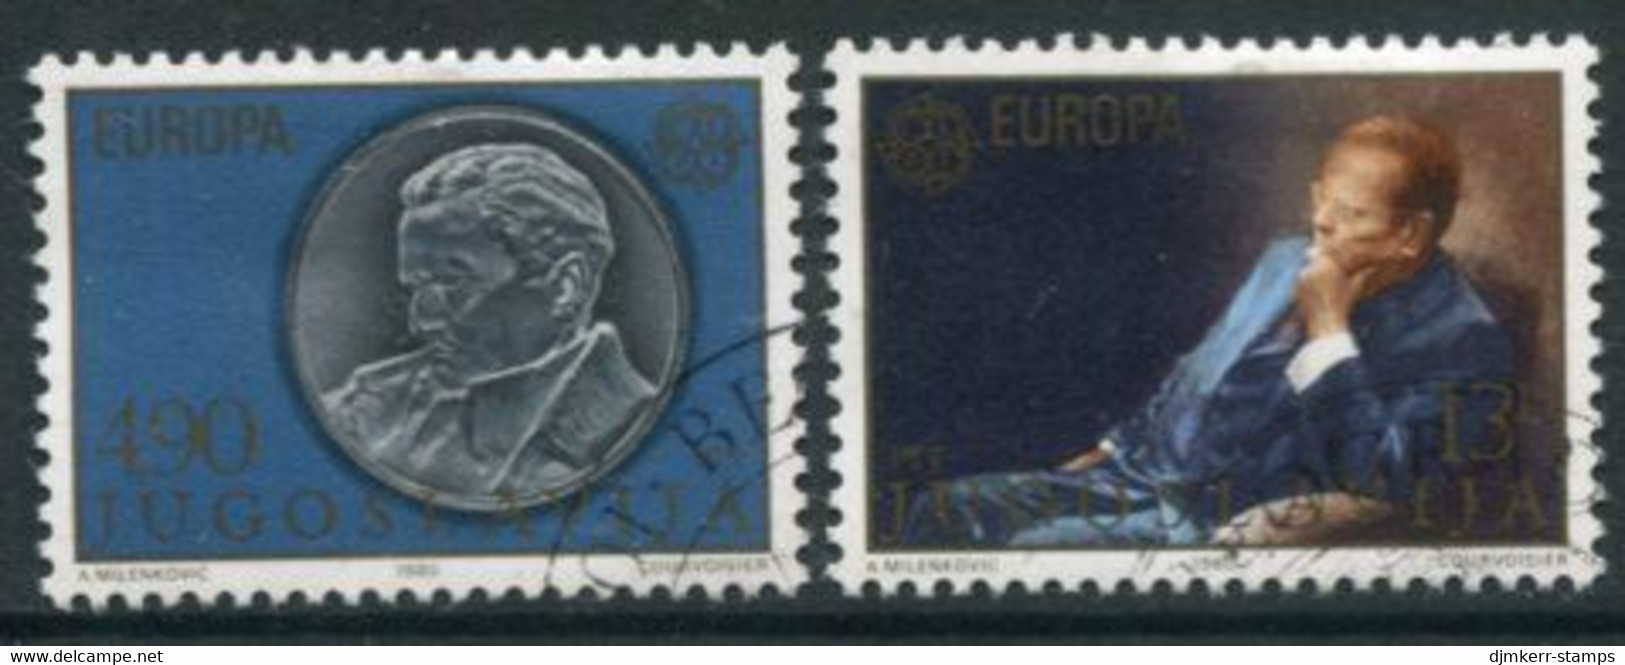 YUGOSLAVIA 1980 Europa: Personalities (Tito) Used.  Michel 1828-29 - Used Stamps